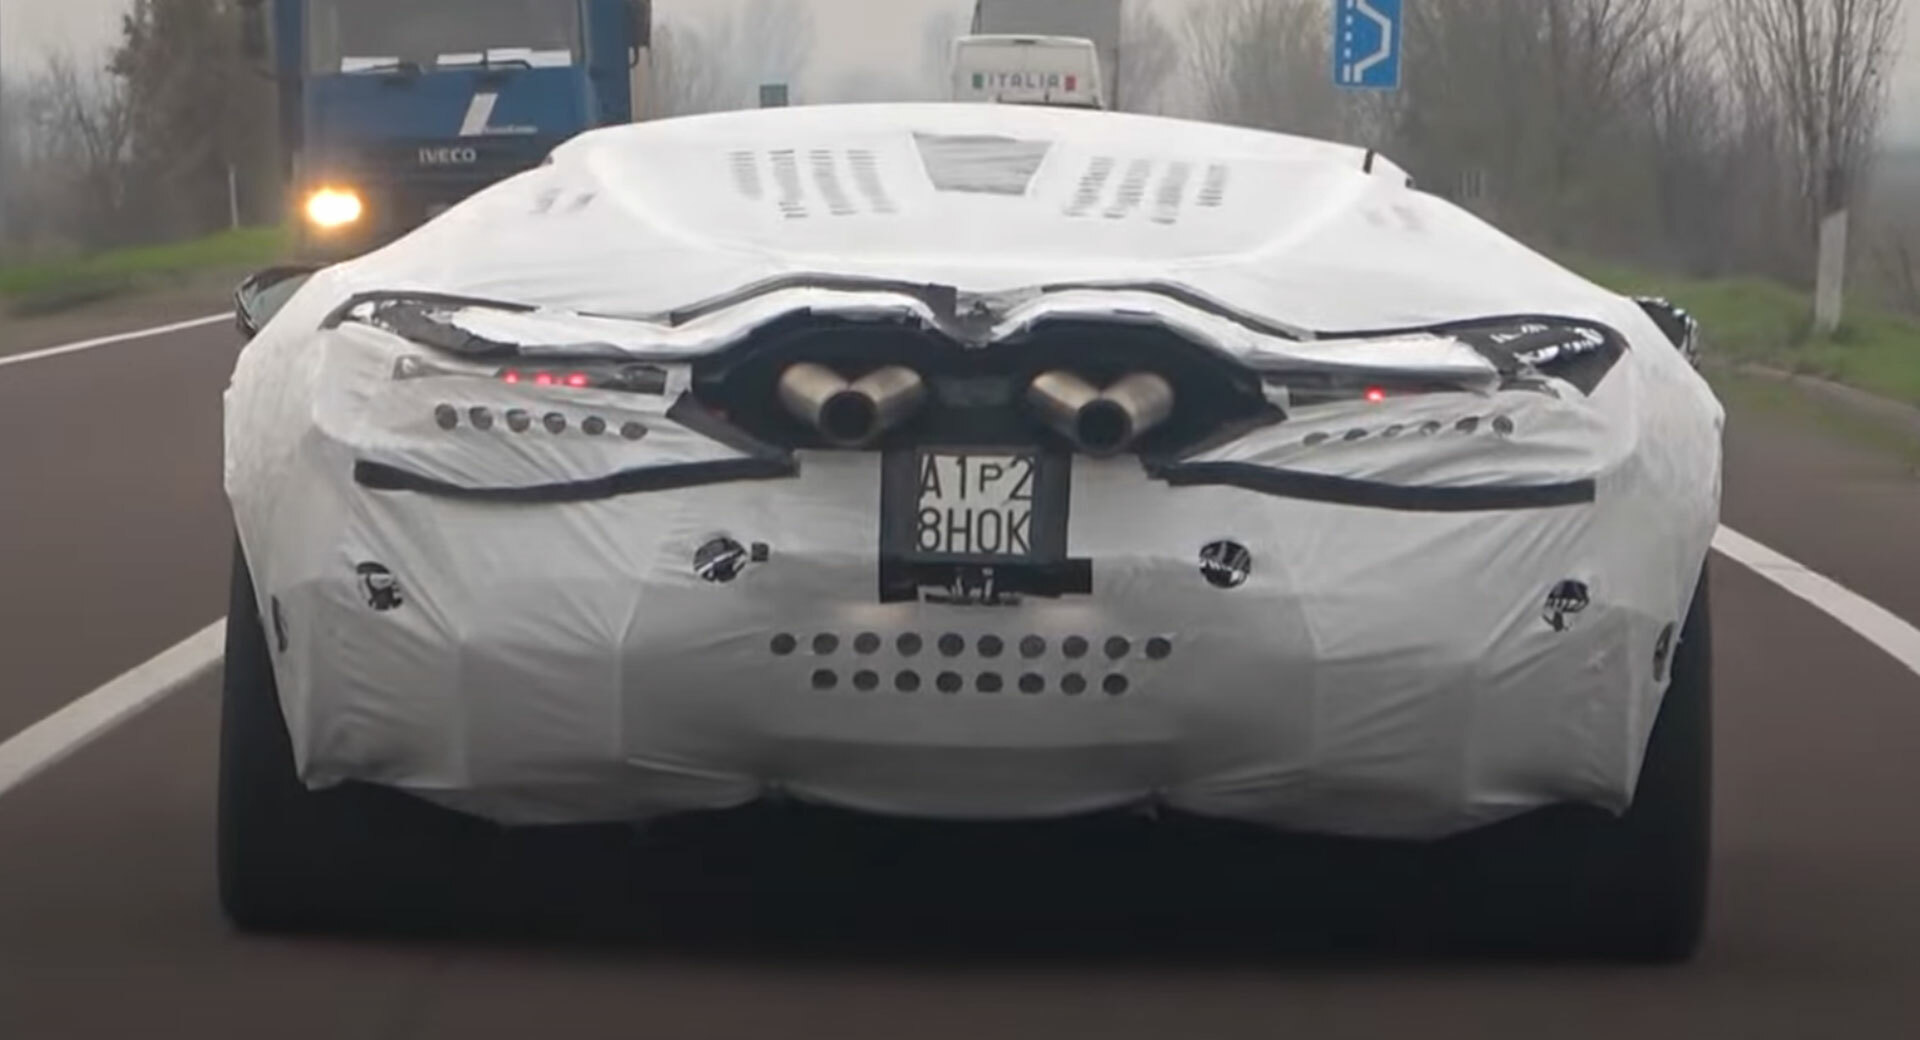 Check Out The Funky Exhaust Of This Lamborghini Prototype | Carscoops